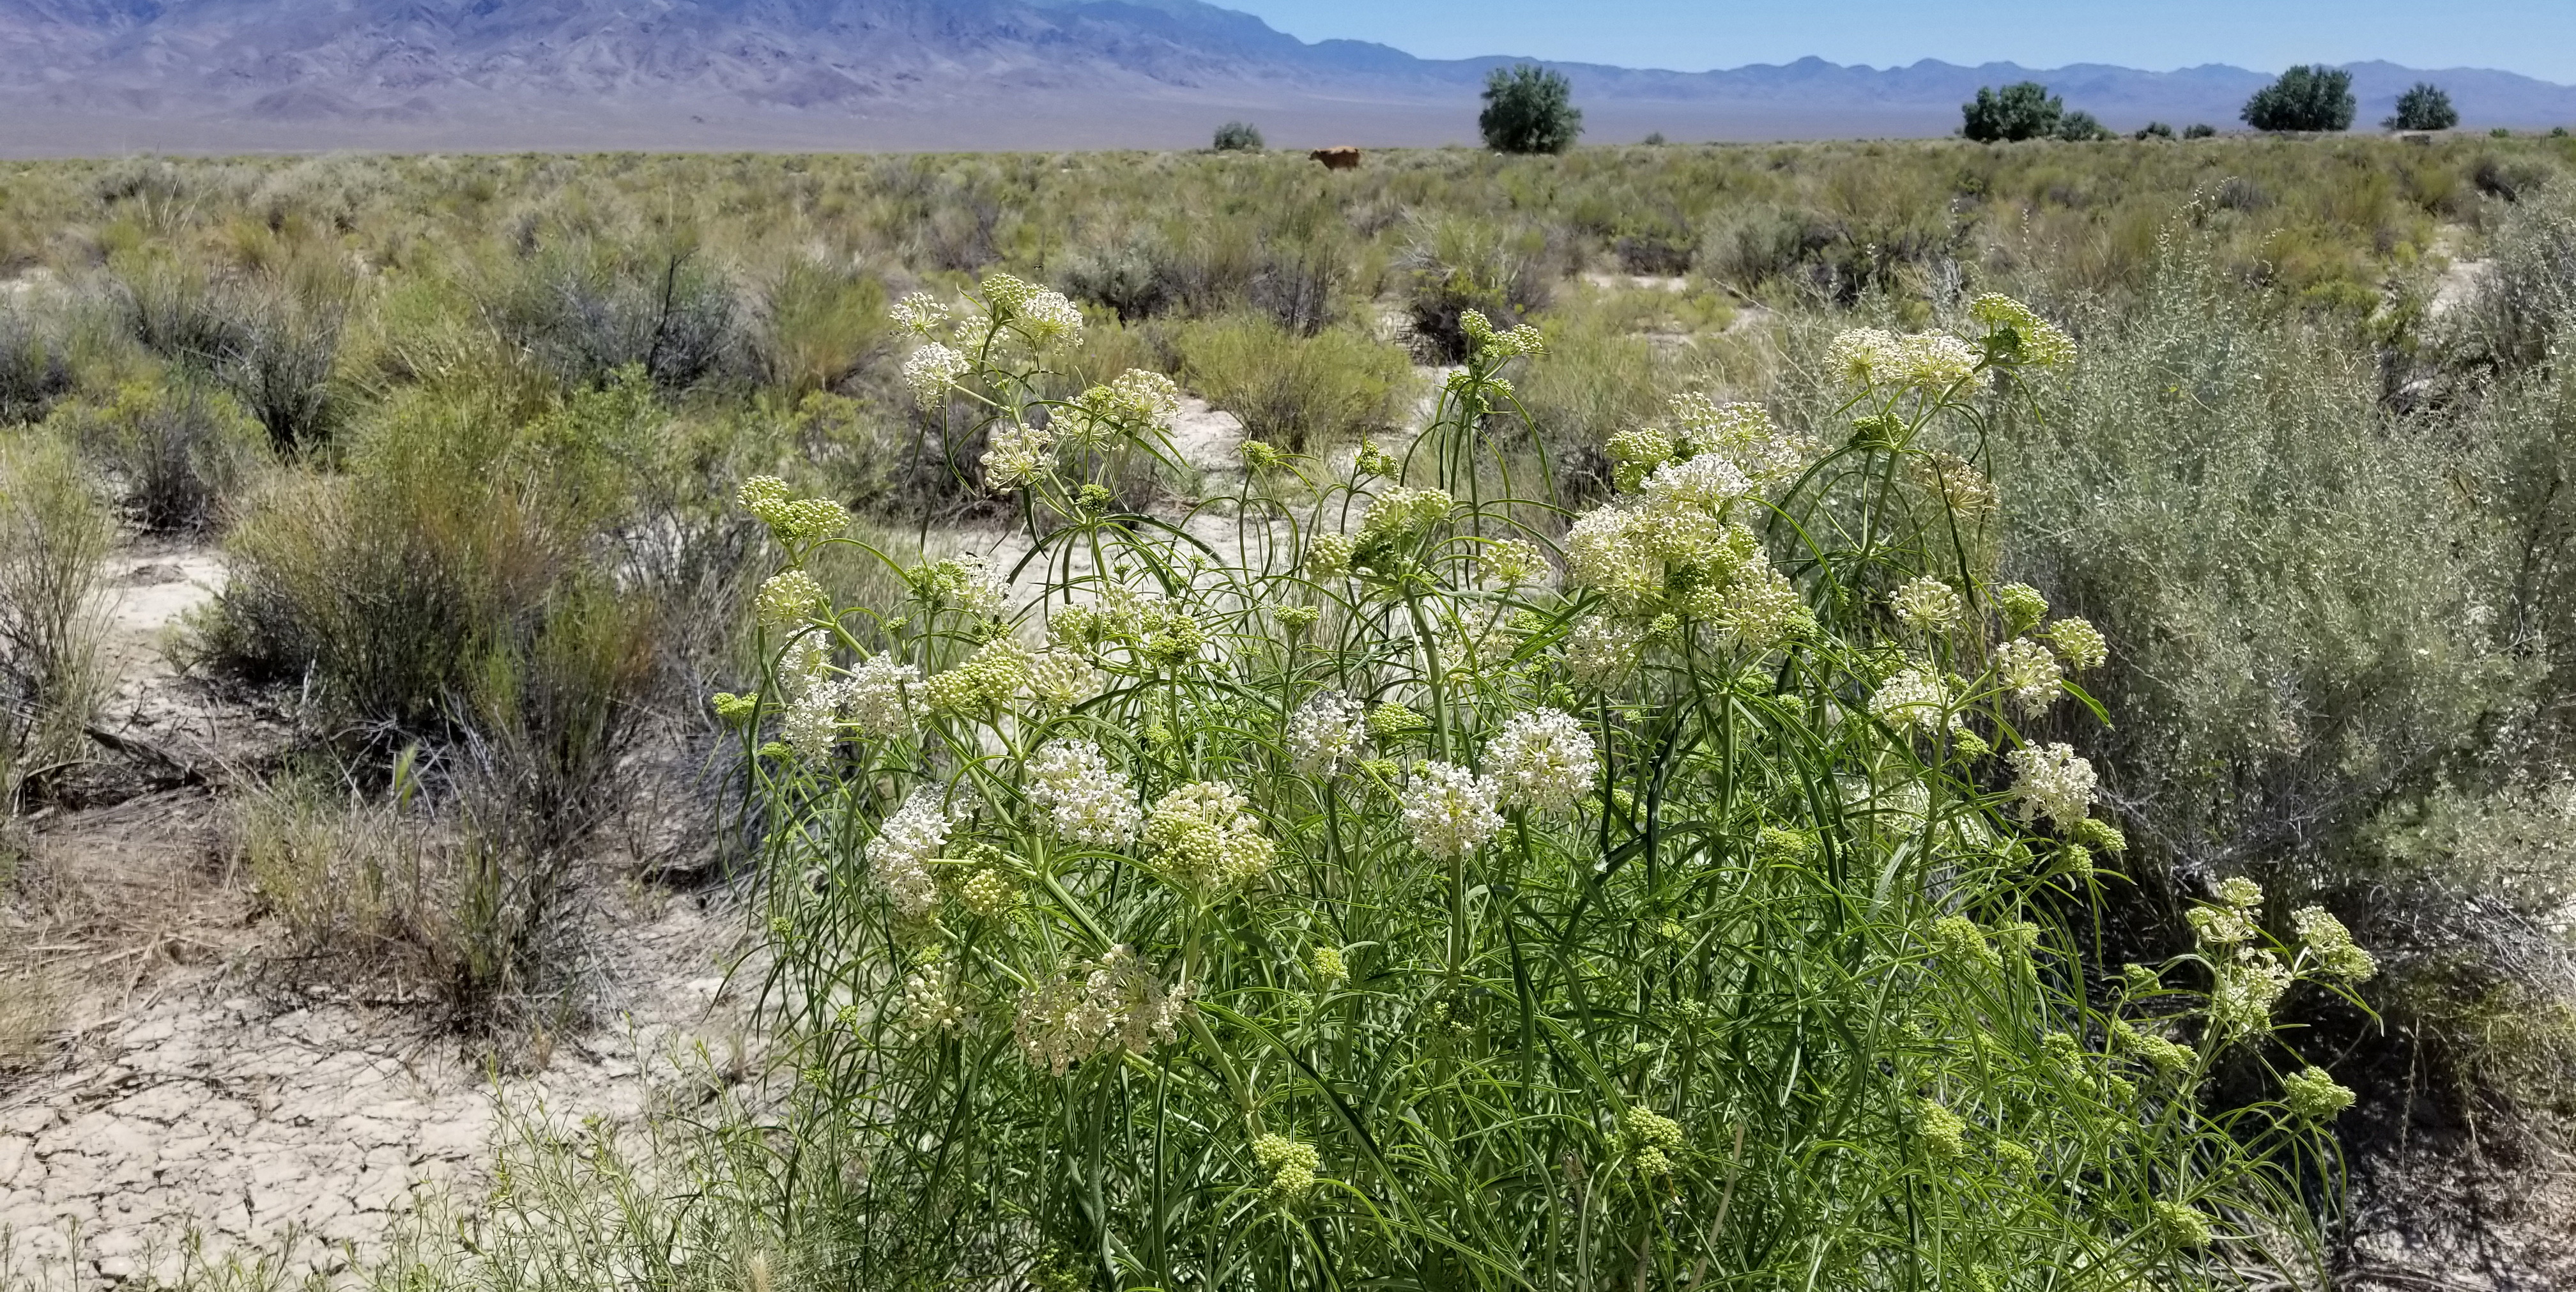 White milkweed flowers blossom in the foreground of an arid rangeland scene, dotted with shrubs. In the distance is cattle, and farther yet, some bluish mountains.